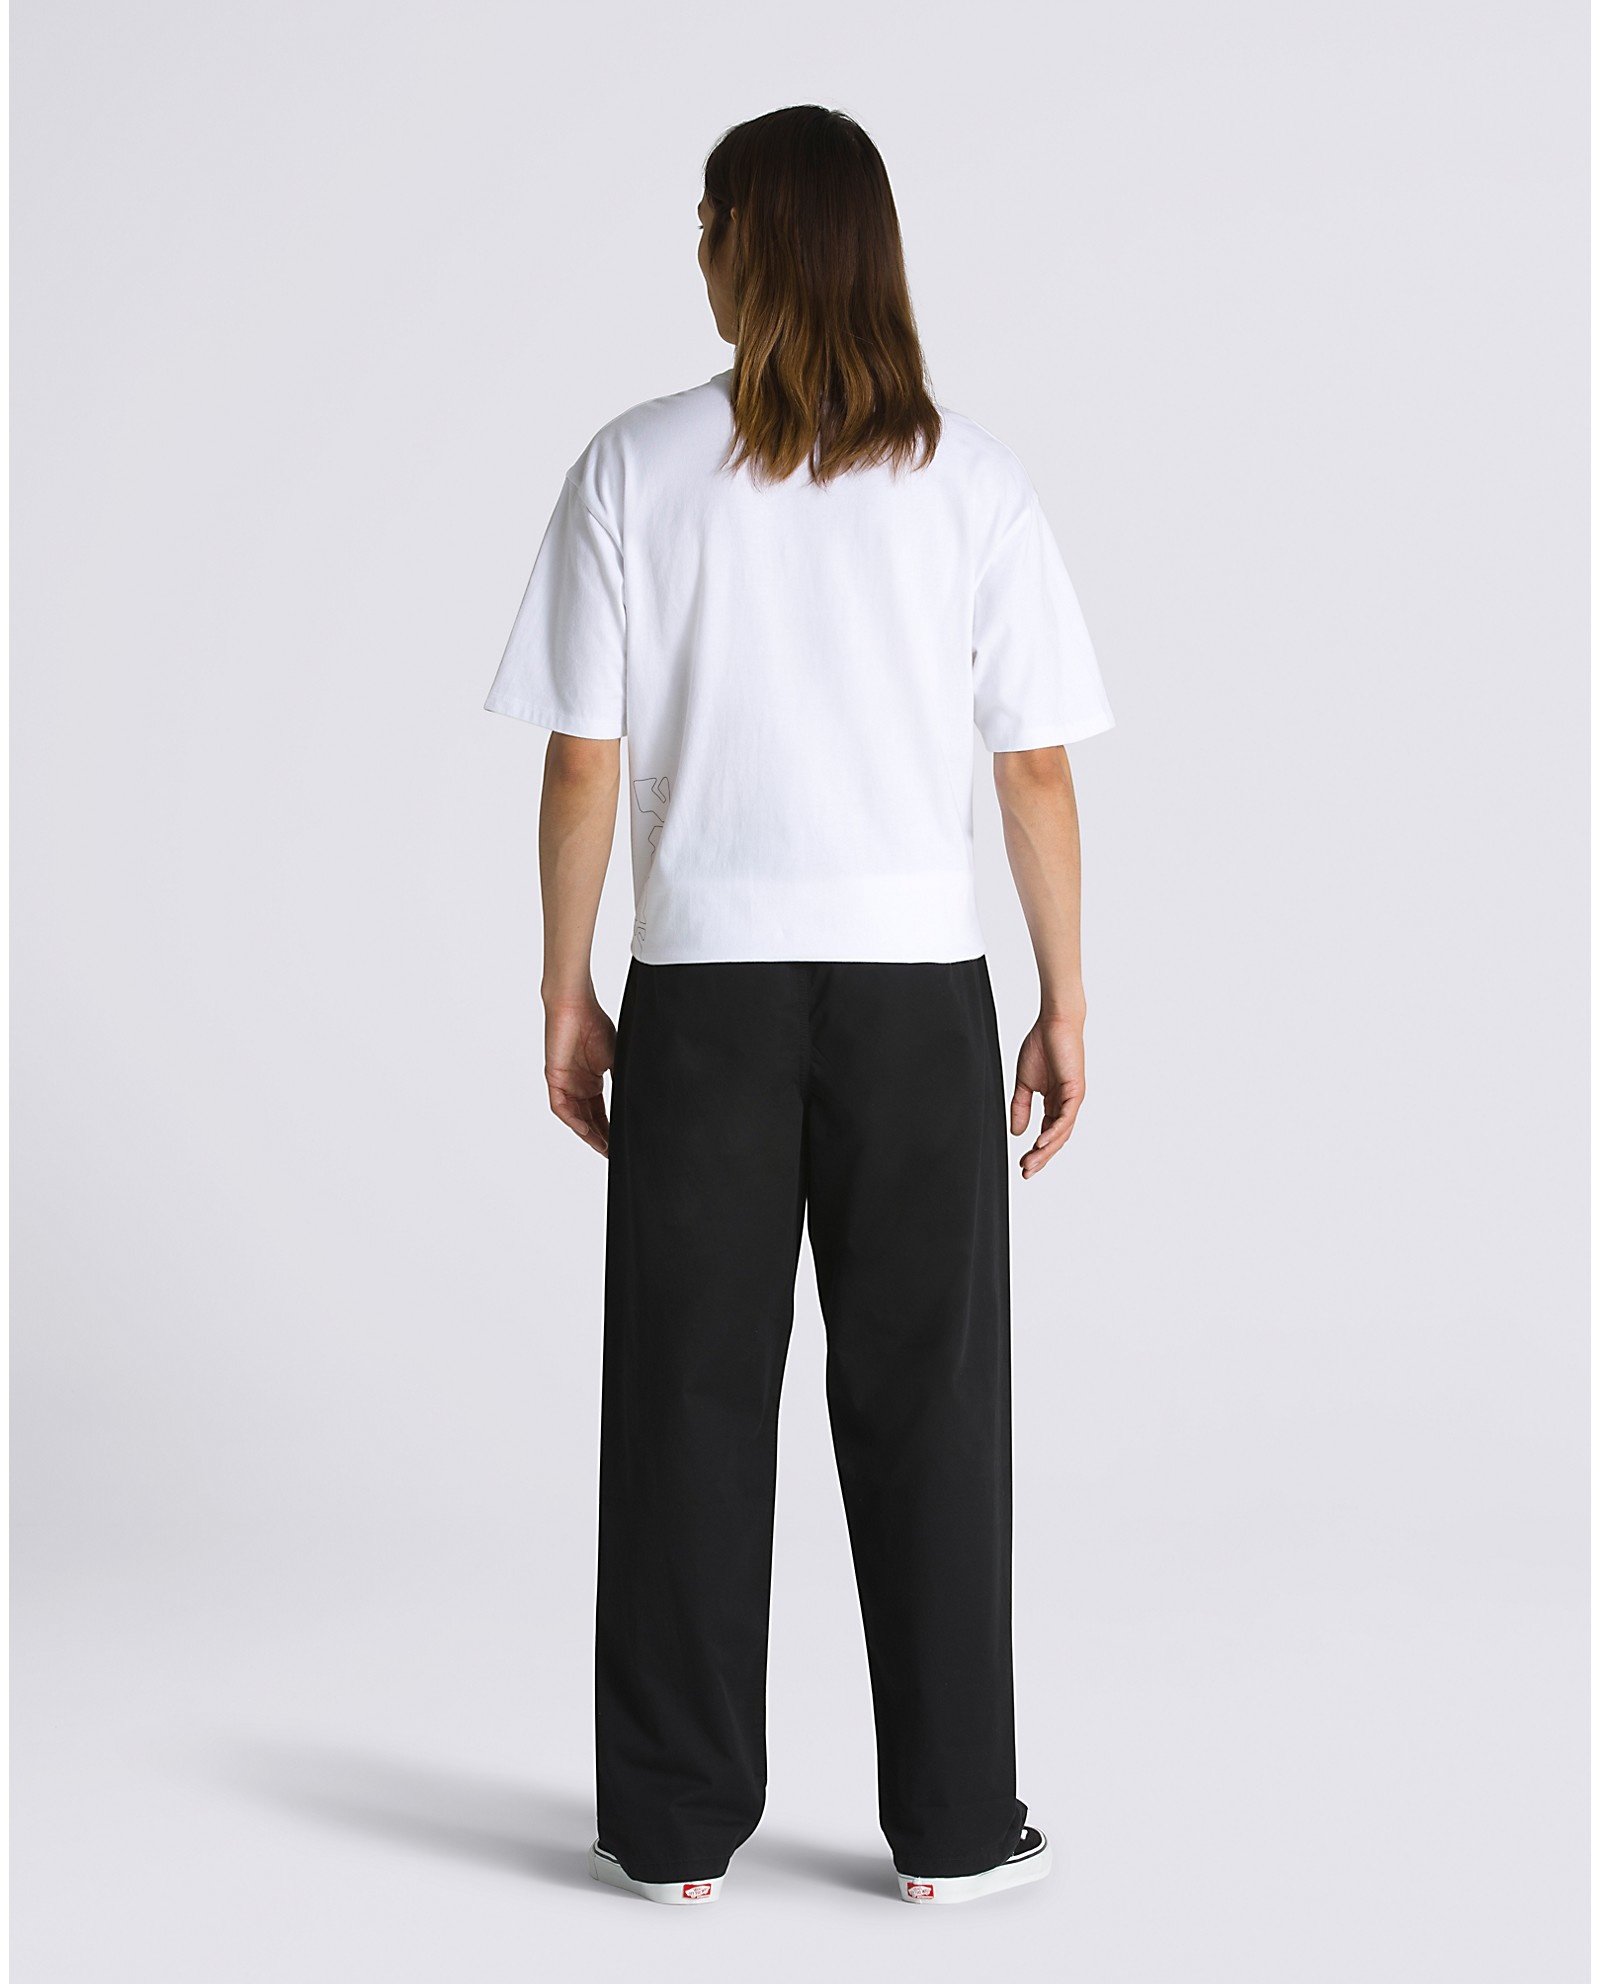 We're elevating personal style with the Range Baggy Tapered Elastic Waist  Pants. Inspired by skating's fun in-between moments and des